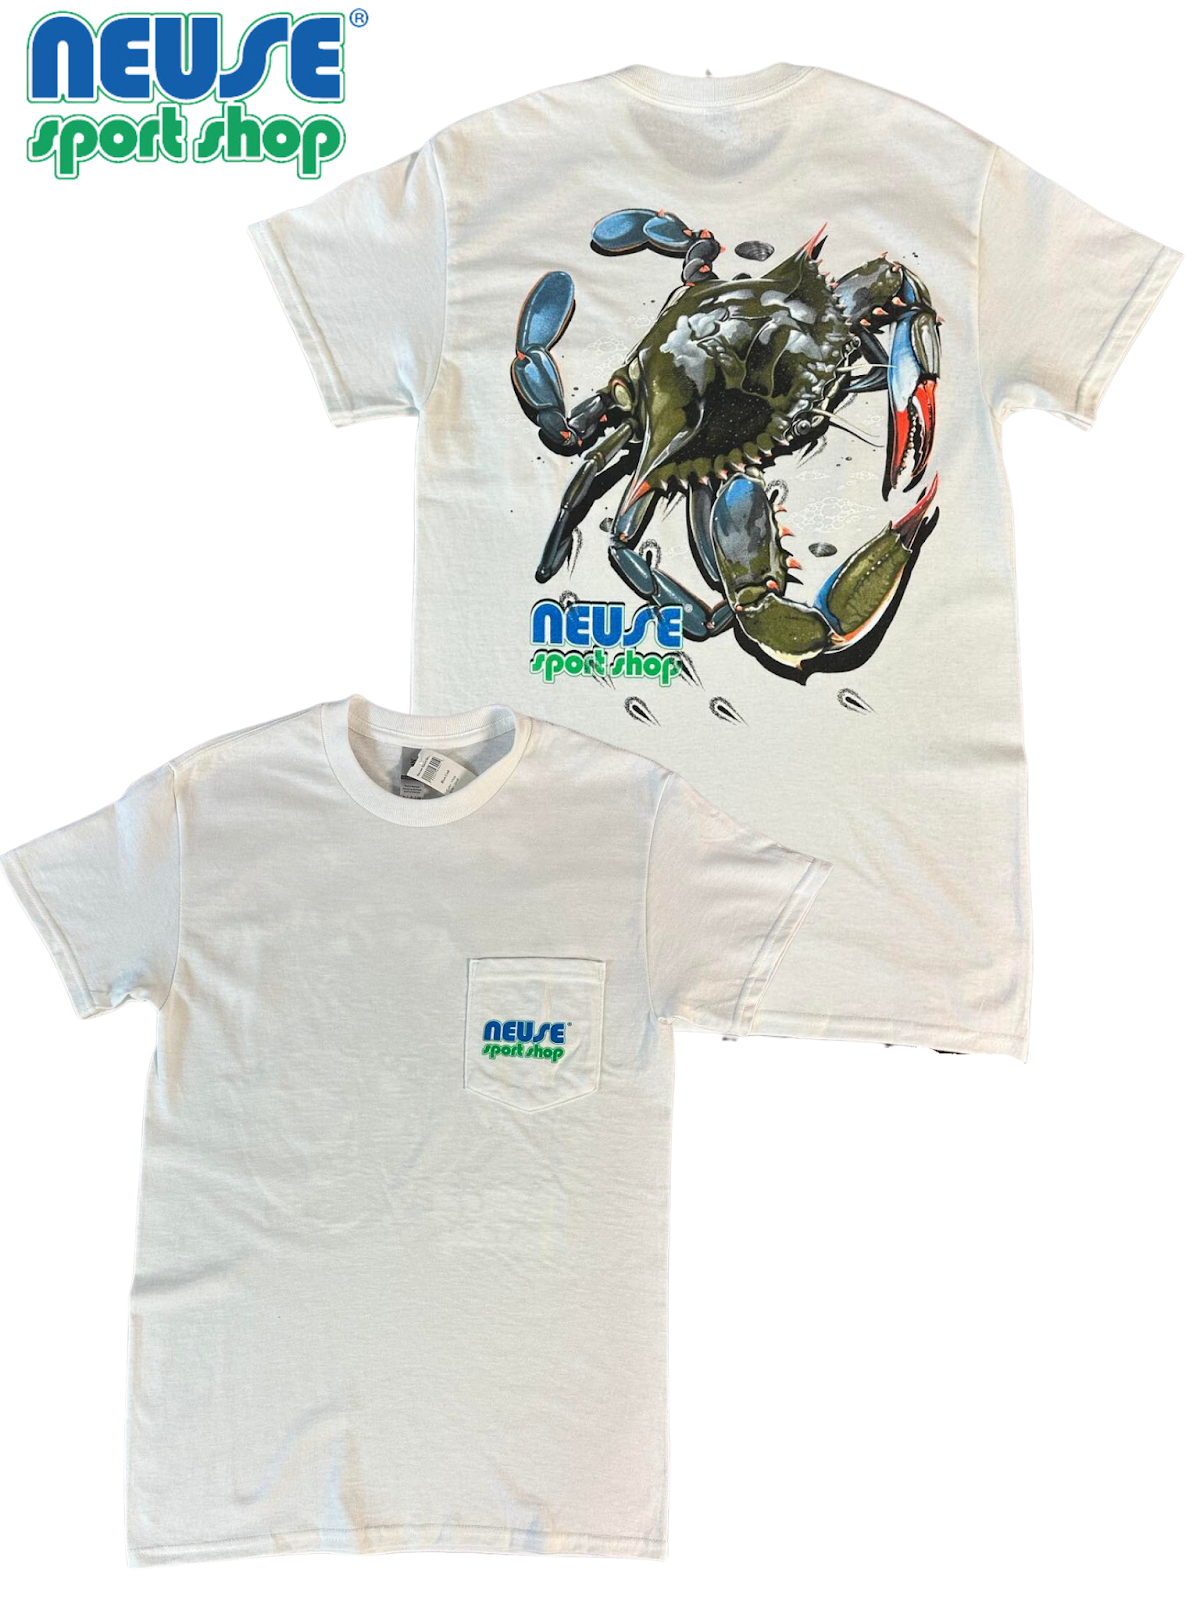 Neuse Sport Shop Blue Crab Short Sleeve Tee with Front Pocket